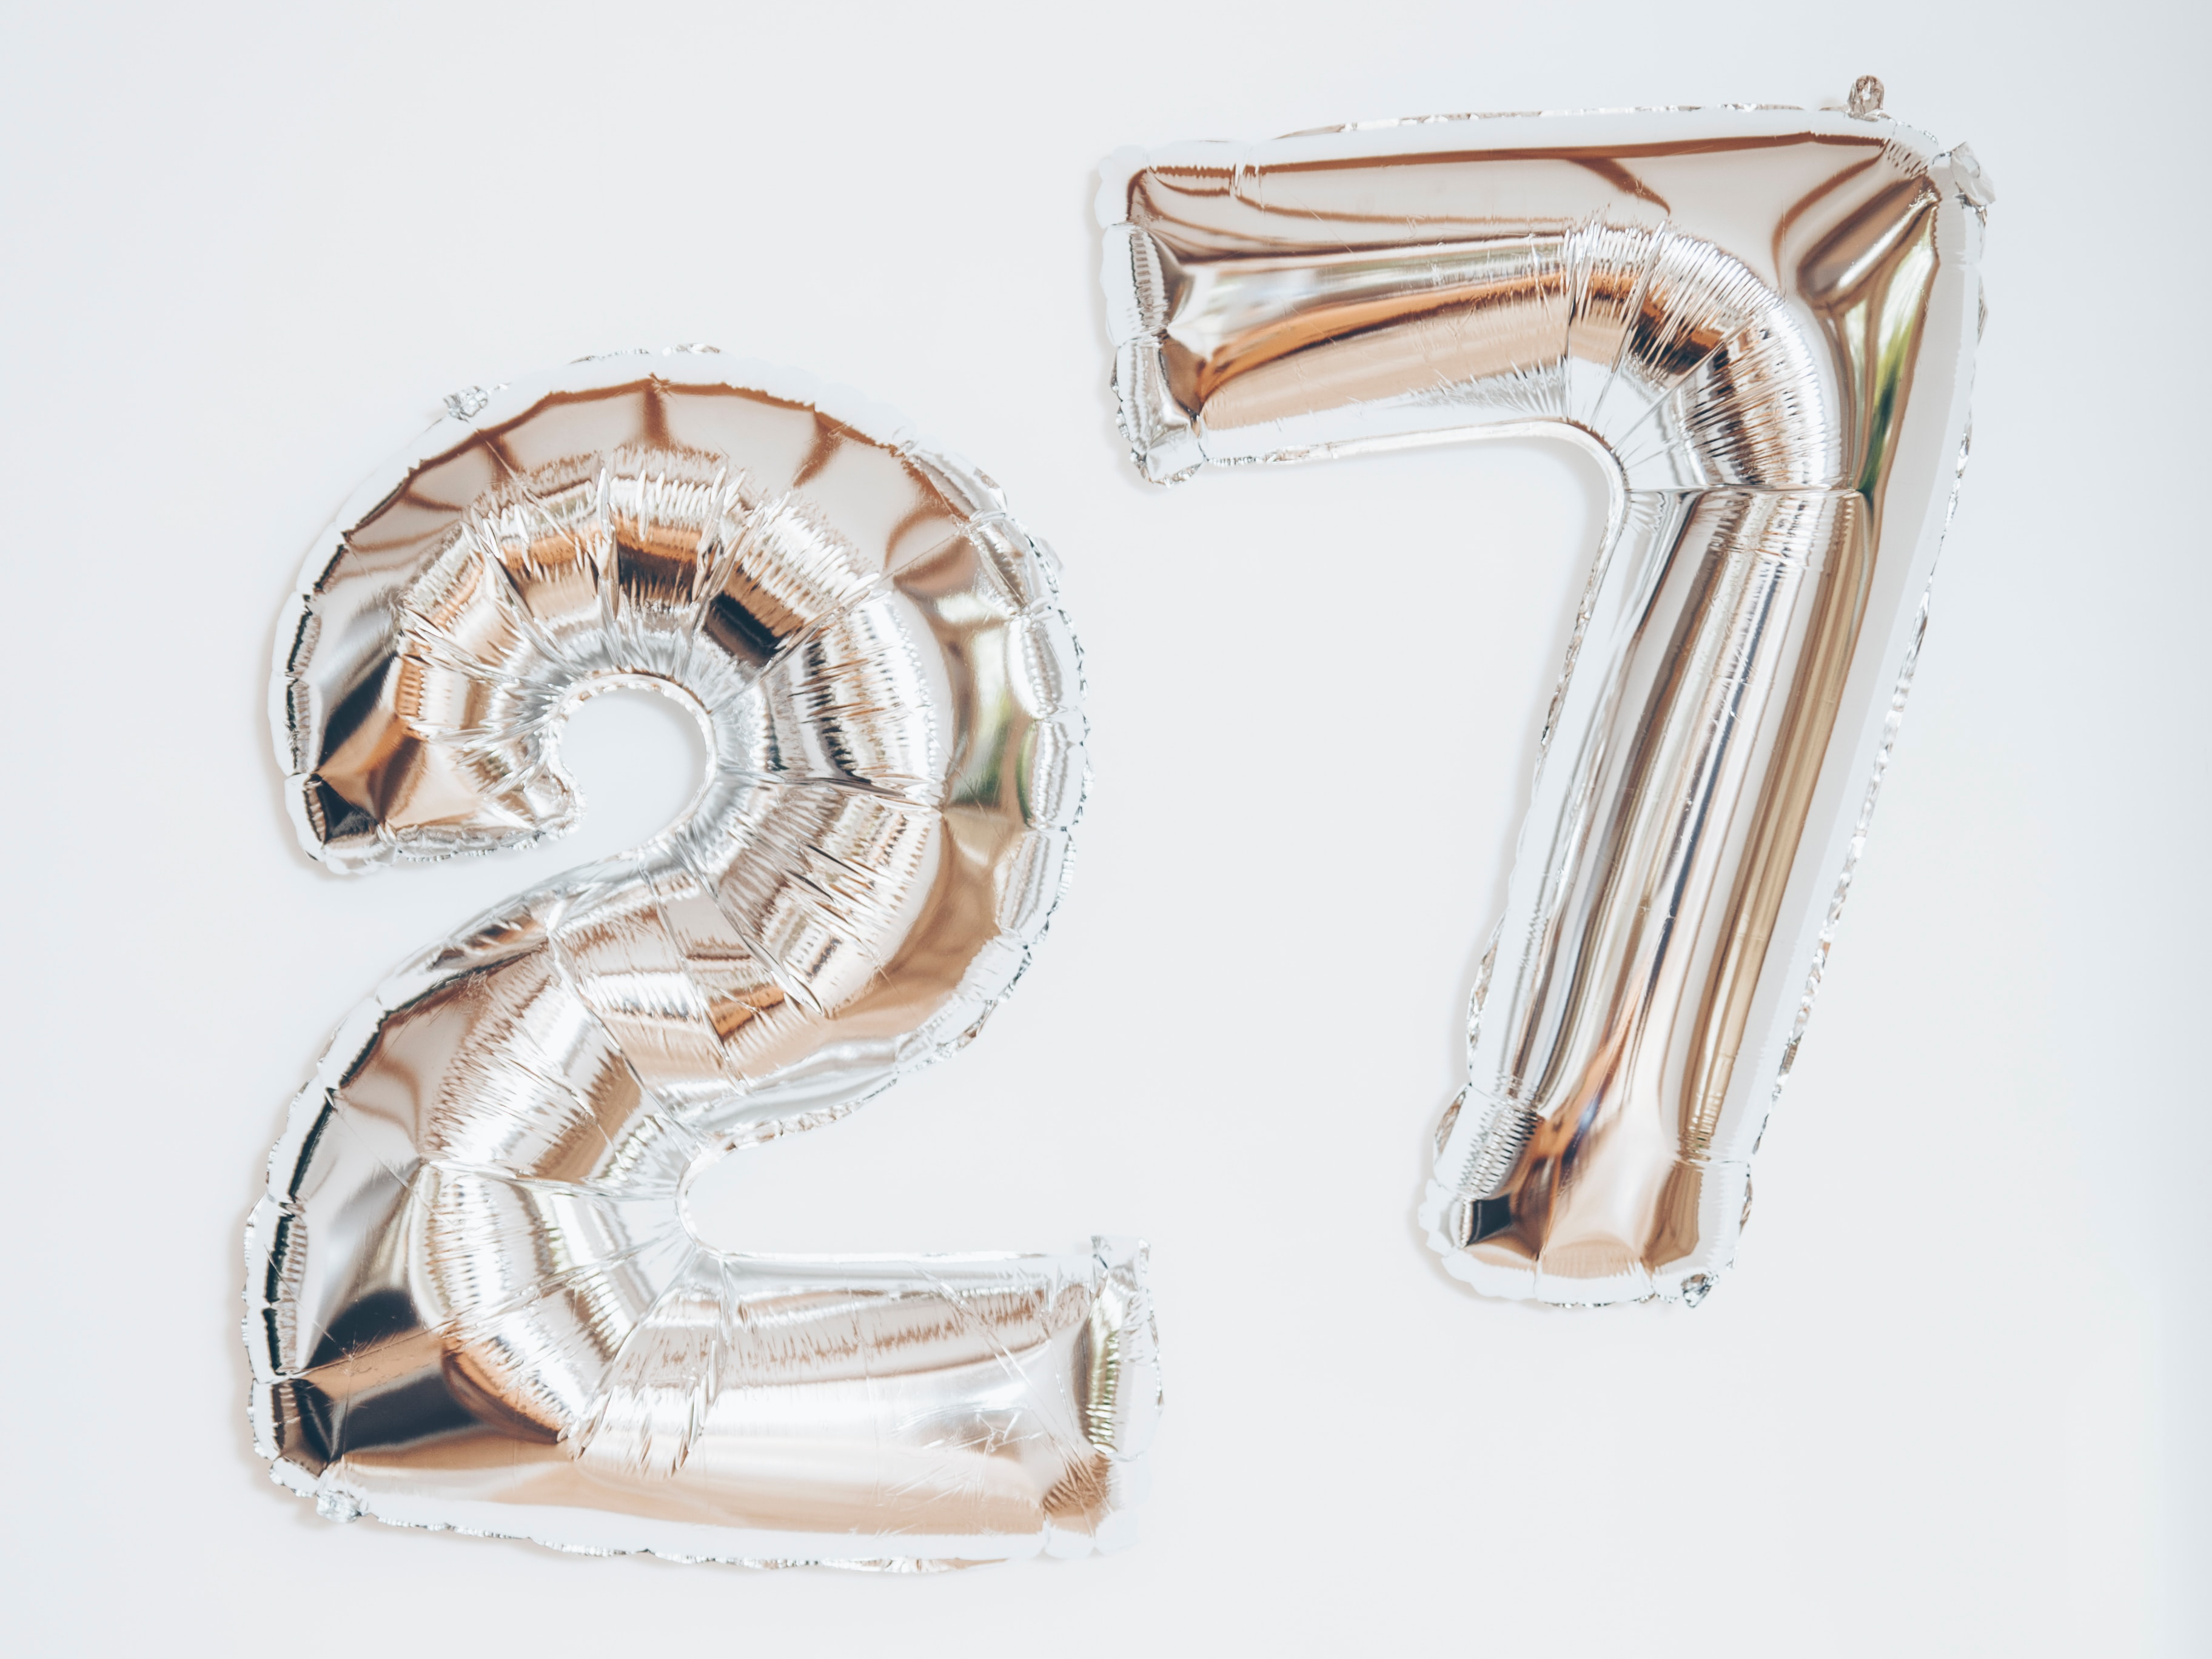 27 things I learned in 27 years